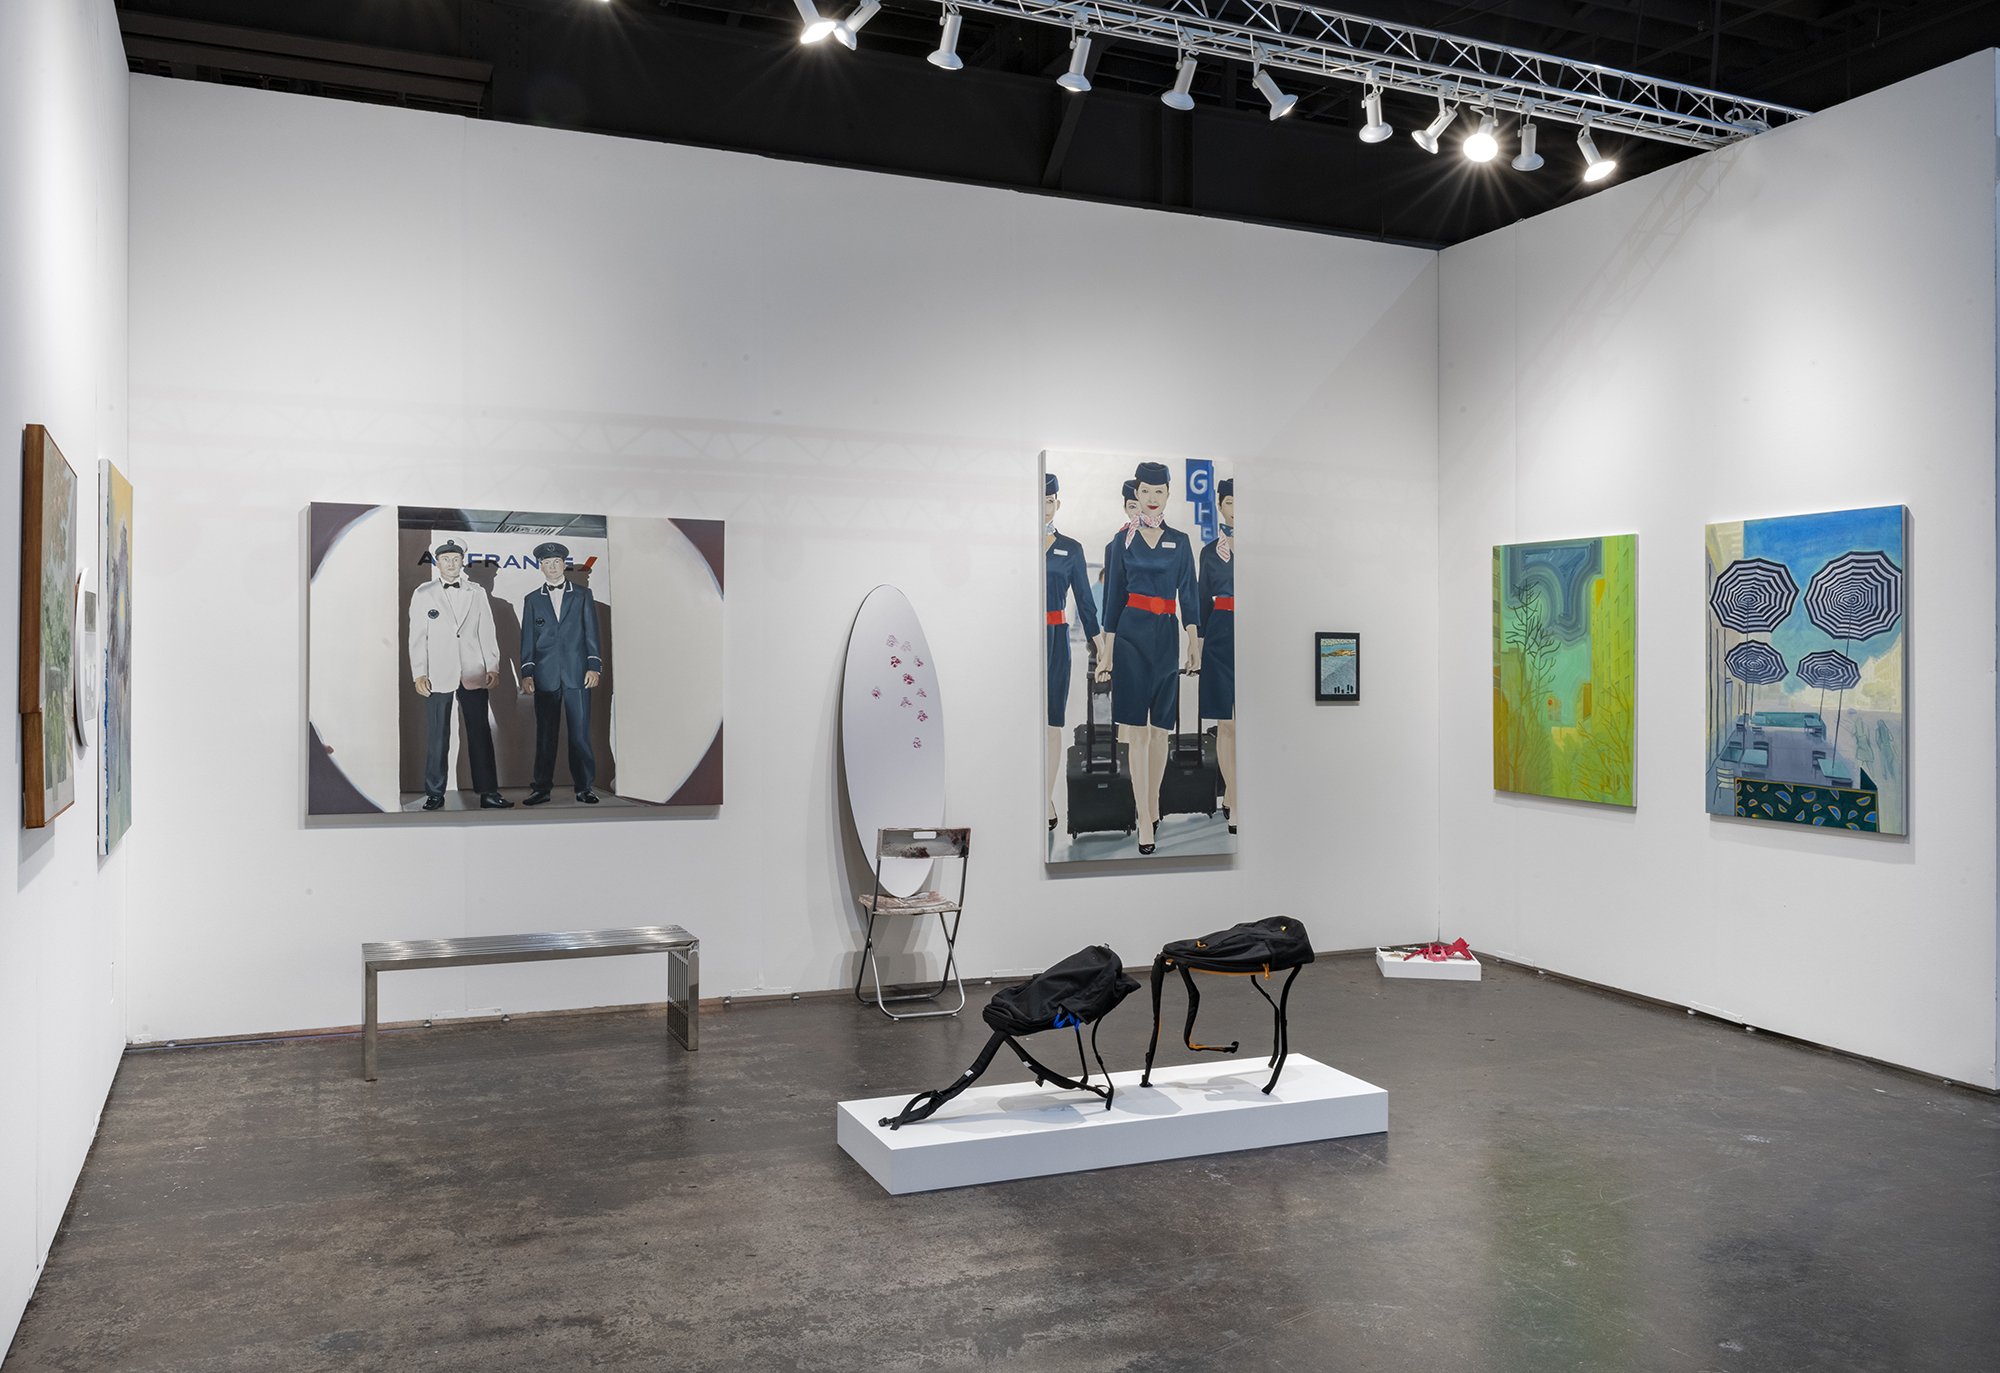  Installation view: NADA Miami, SITUATIONS, Booth 6.08, 2021 